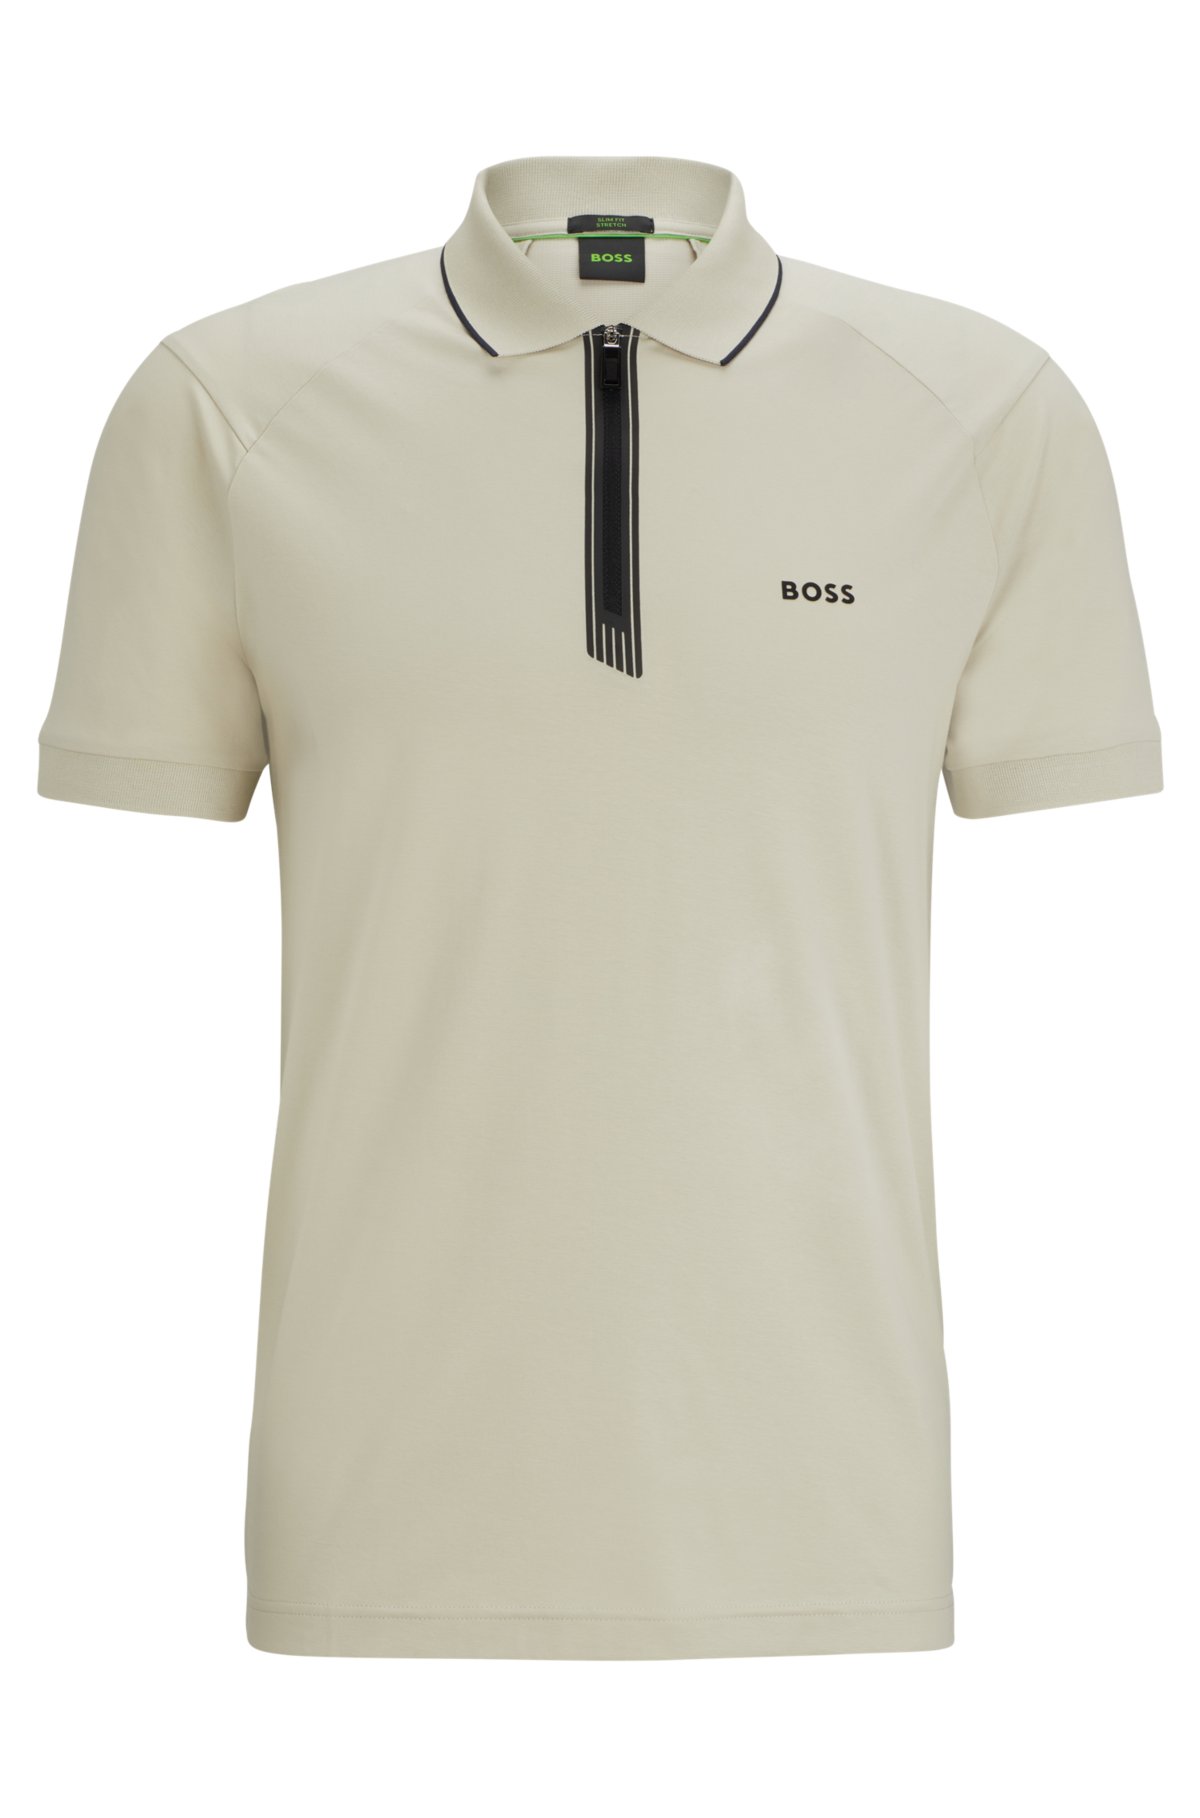 slim-fit placket with polo - BOSS zip Stretch-cotton shirt